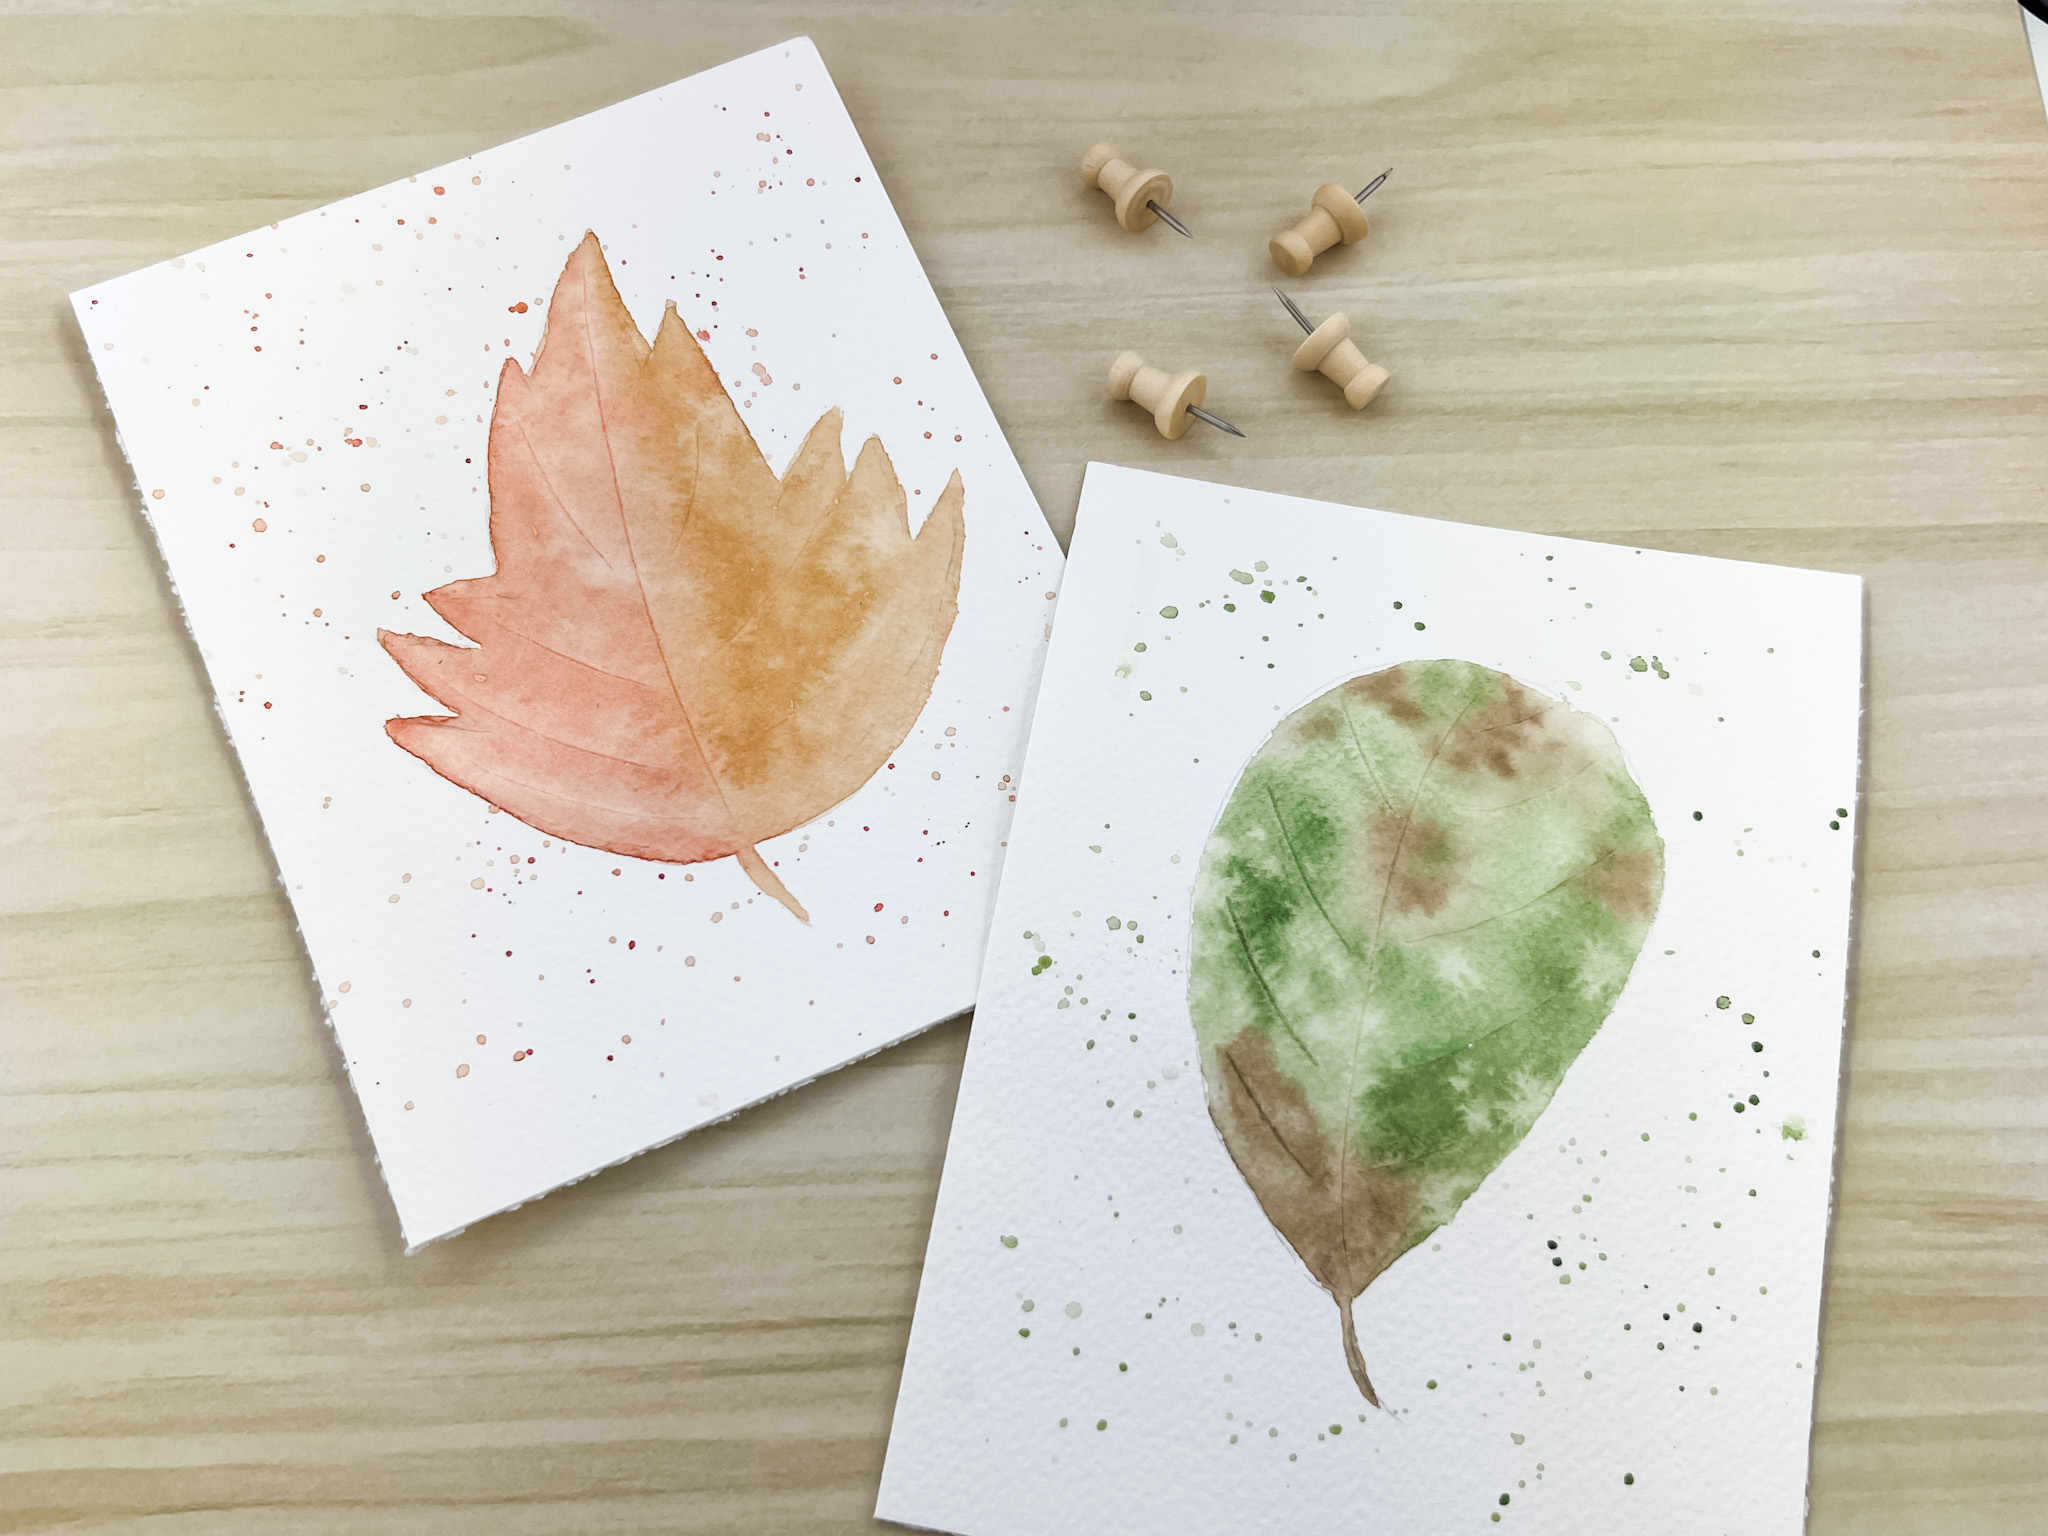 Easy Watercolor Painting | Fall Leaf